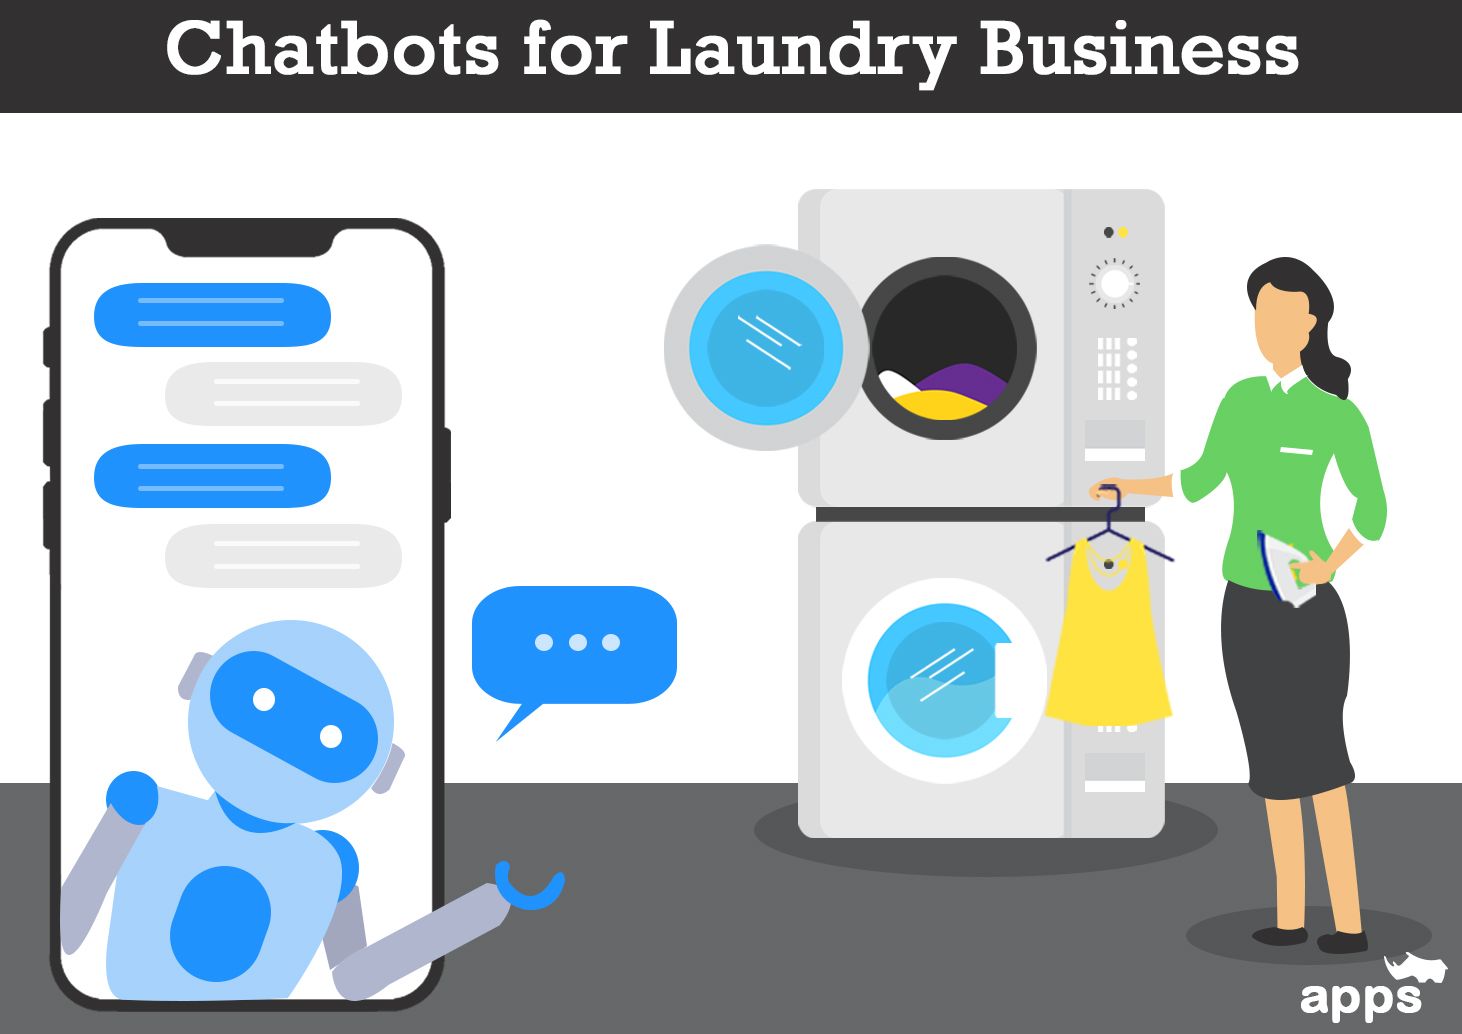 chabot to manage laundry business.jpg